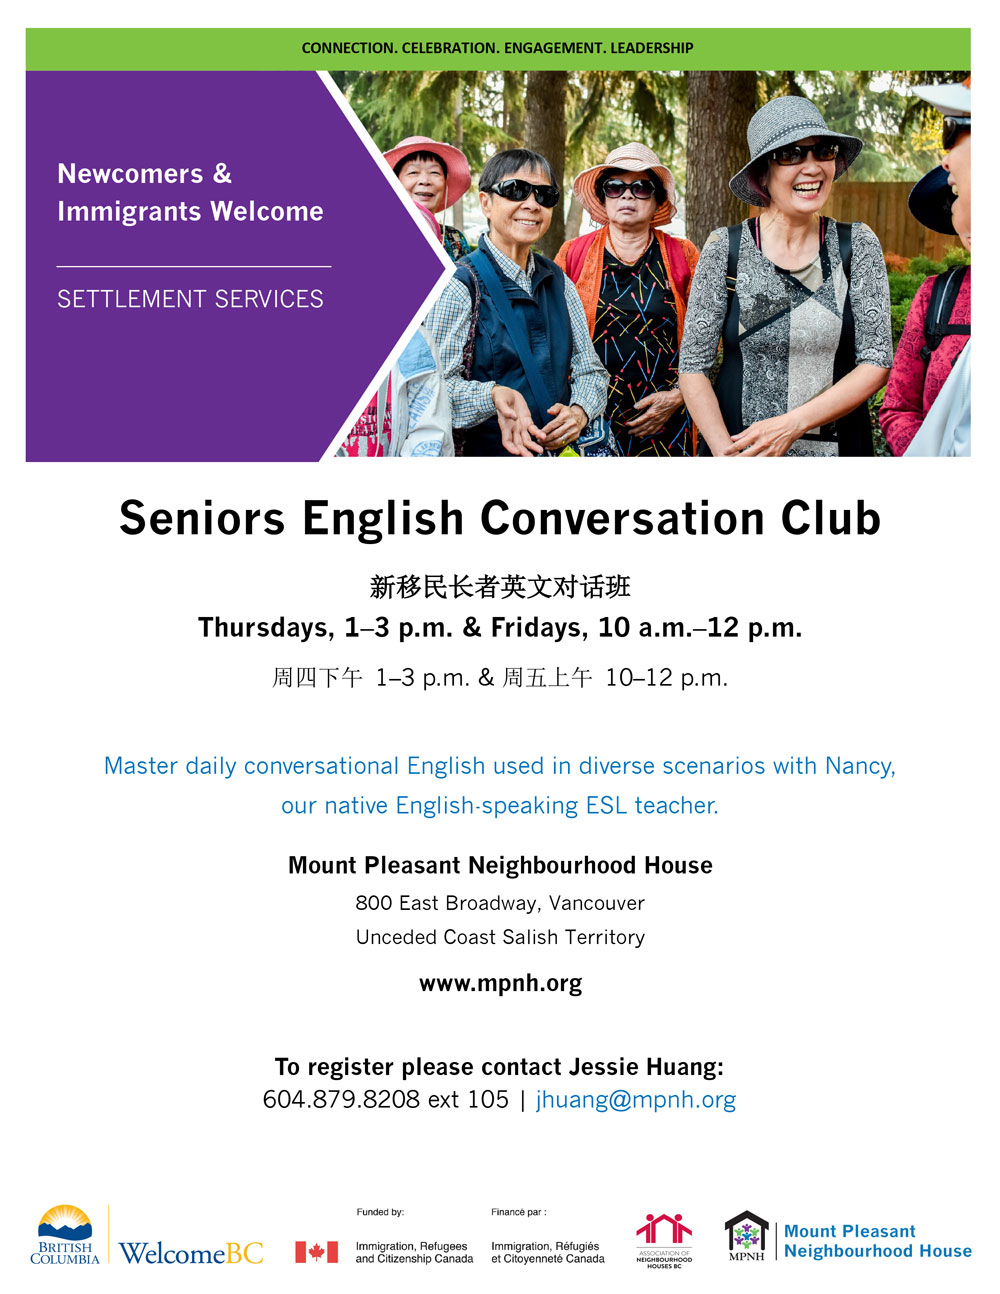 An image of the poster with program details, featuring a photo of a group of seniors wearing hats and sunglasses, smiling and laughing together.